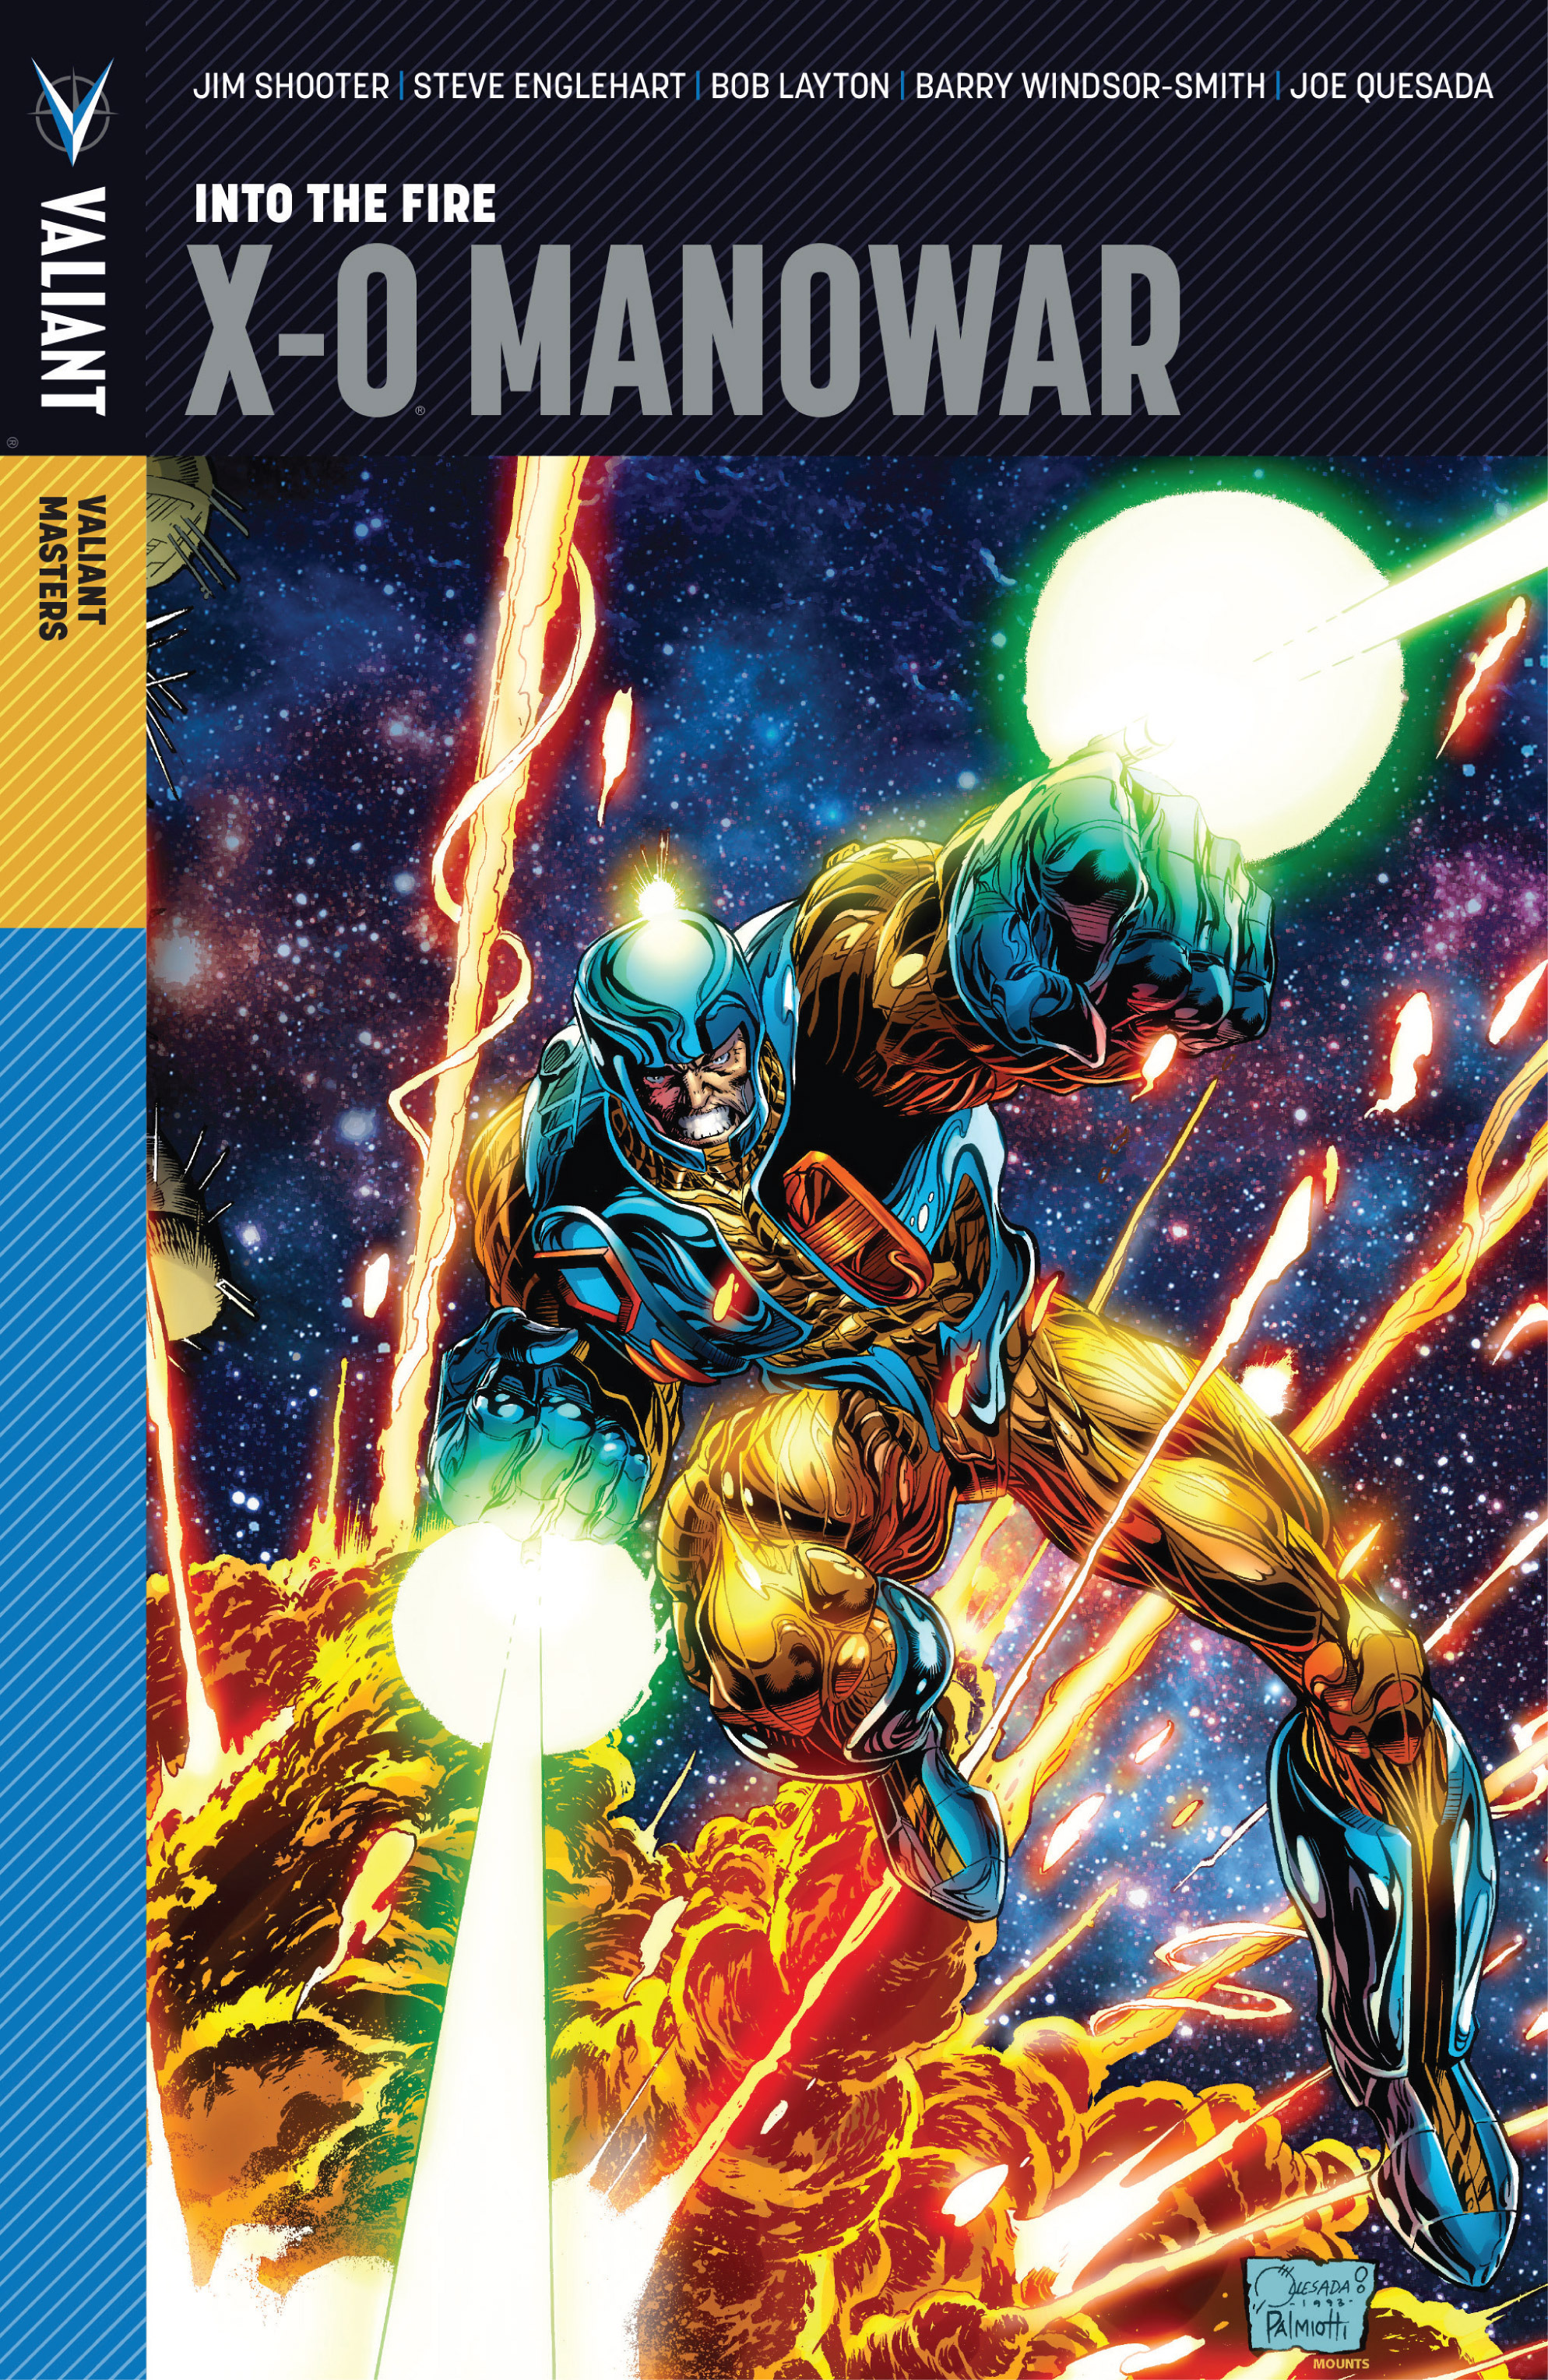 Read online Valiant Masters X-O Manowar: Into the Fire comic -  Issue # TPB (Part 1) - 1